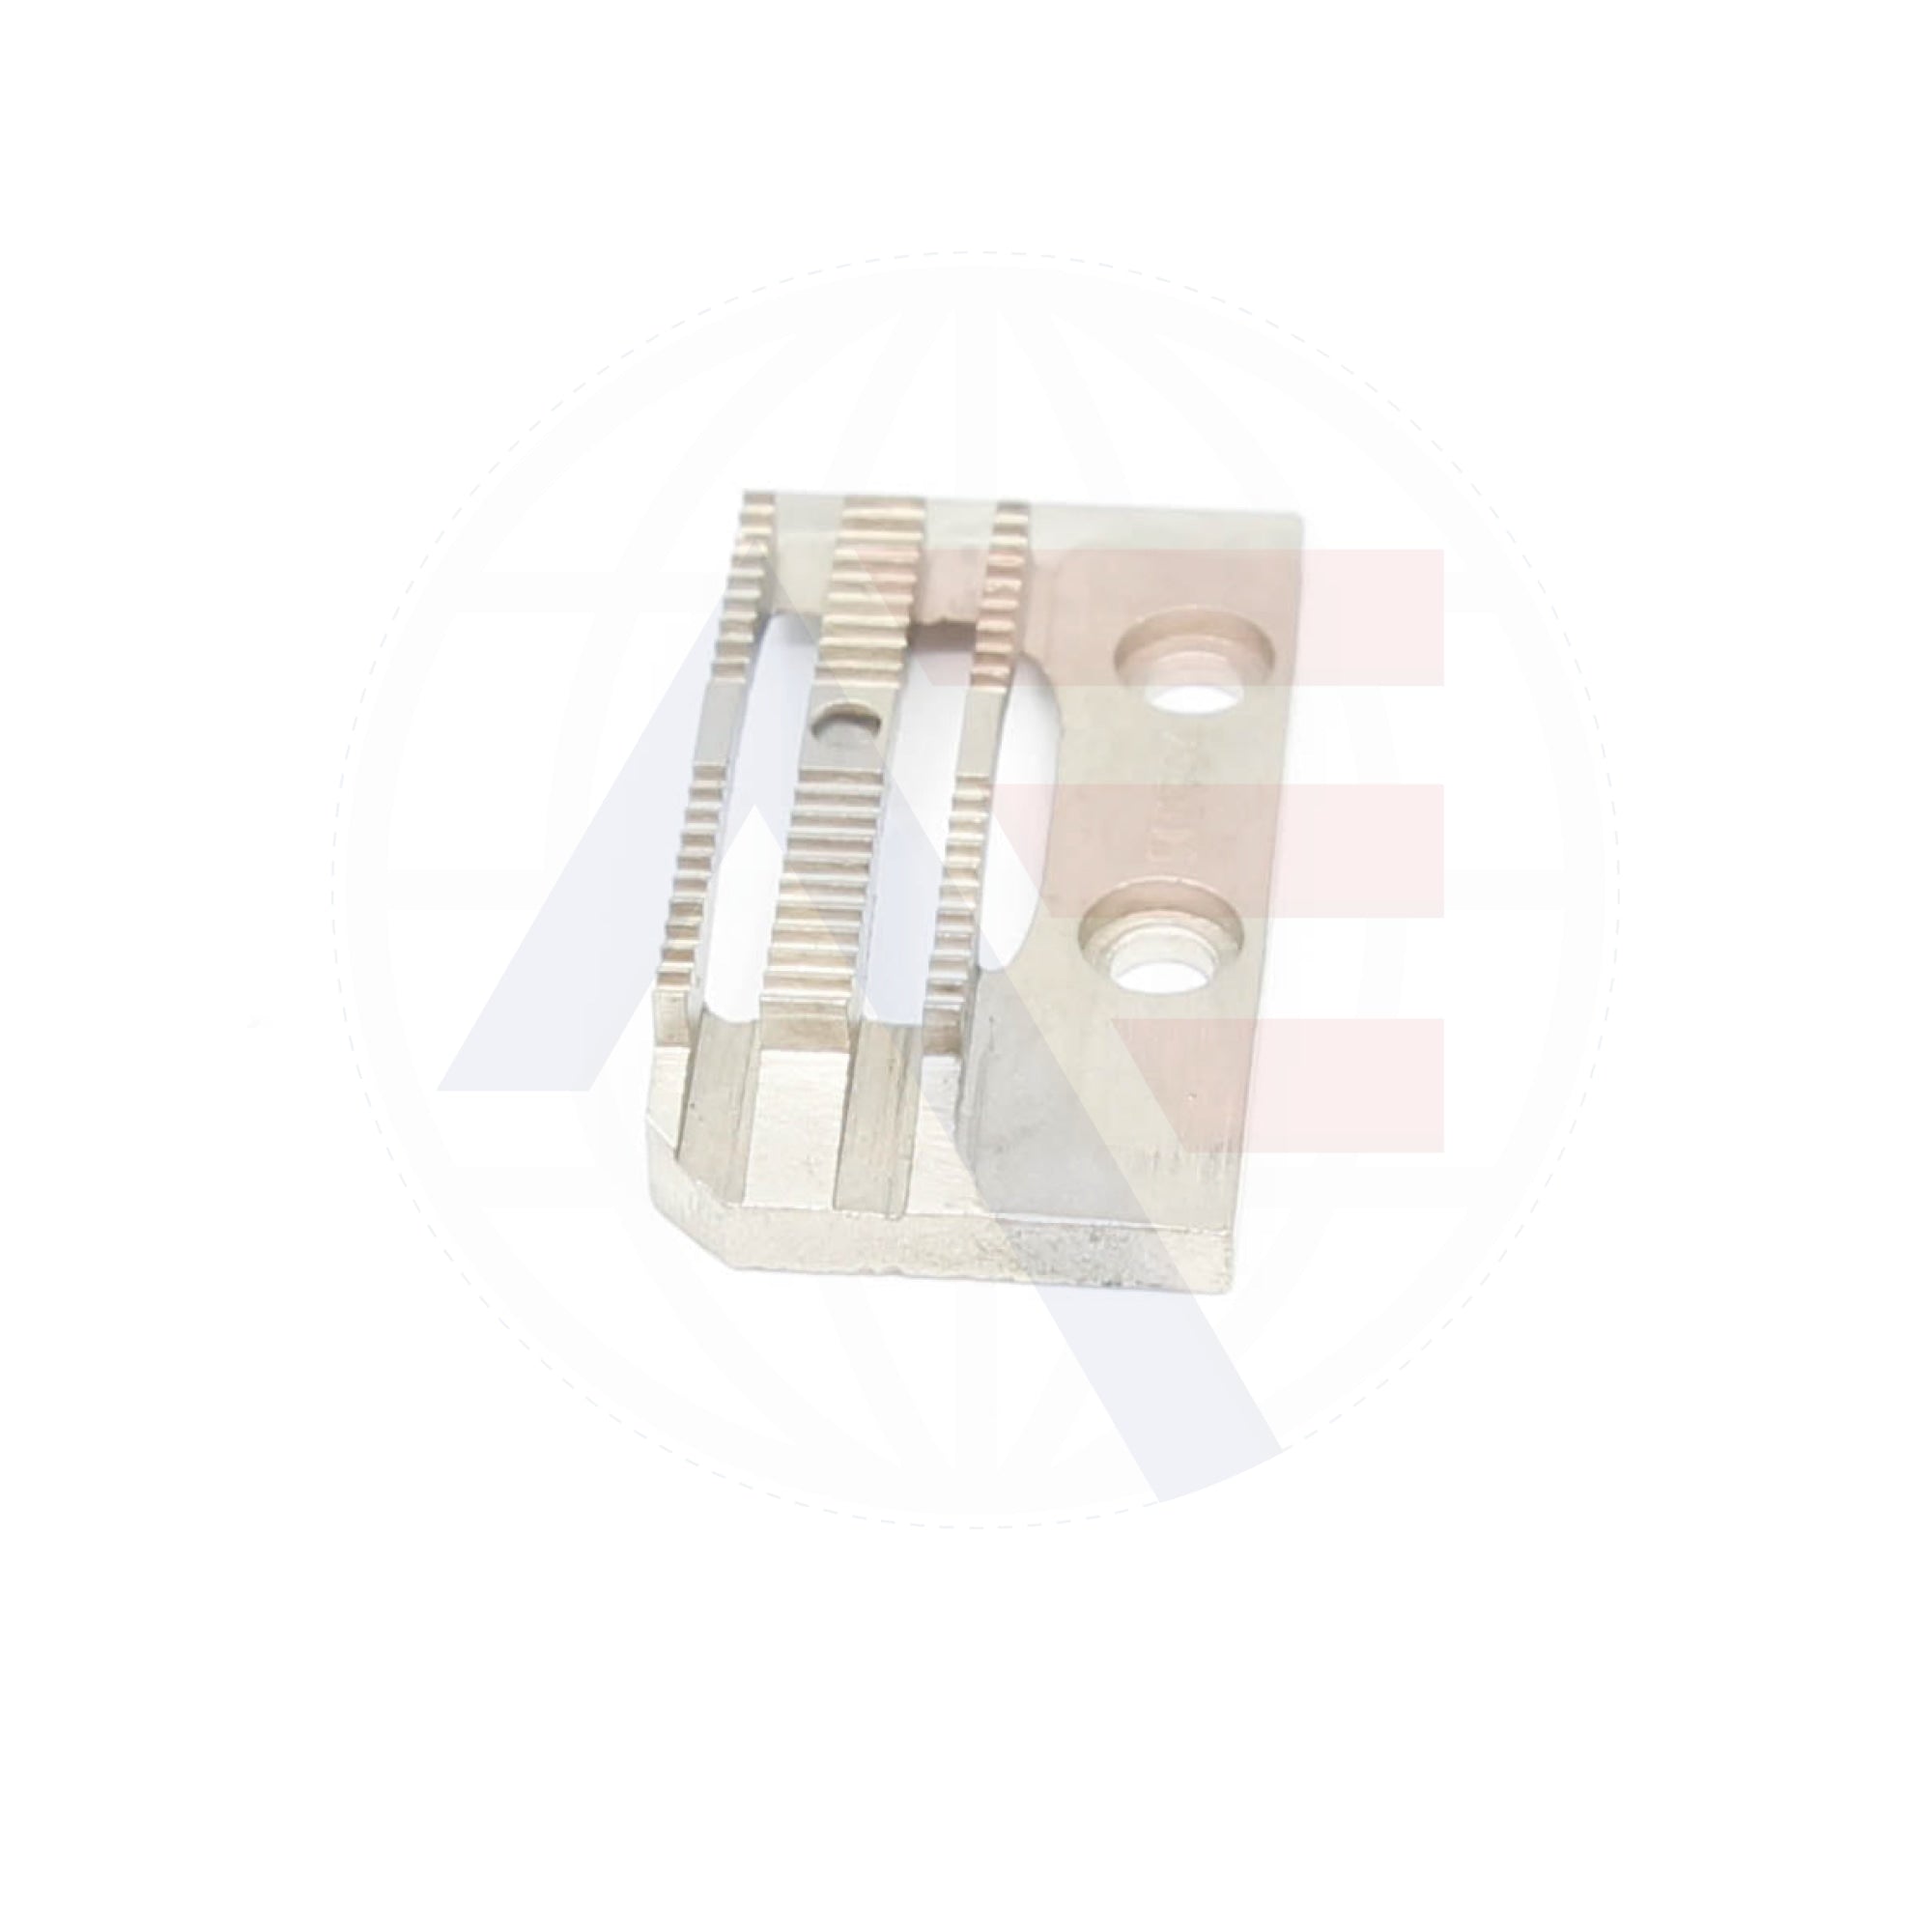 Siruba D704 Feed Dog Sewing Machine Spare Parts